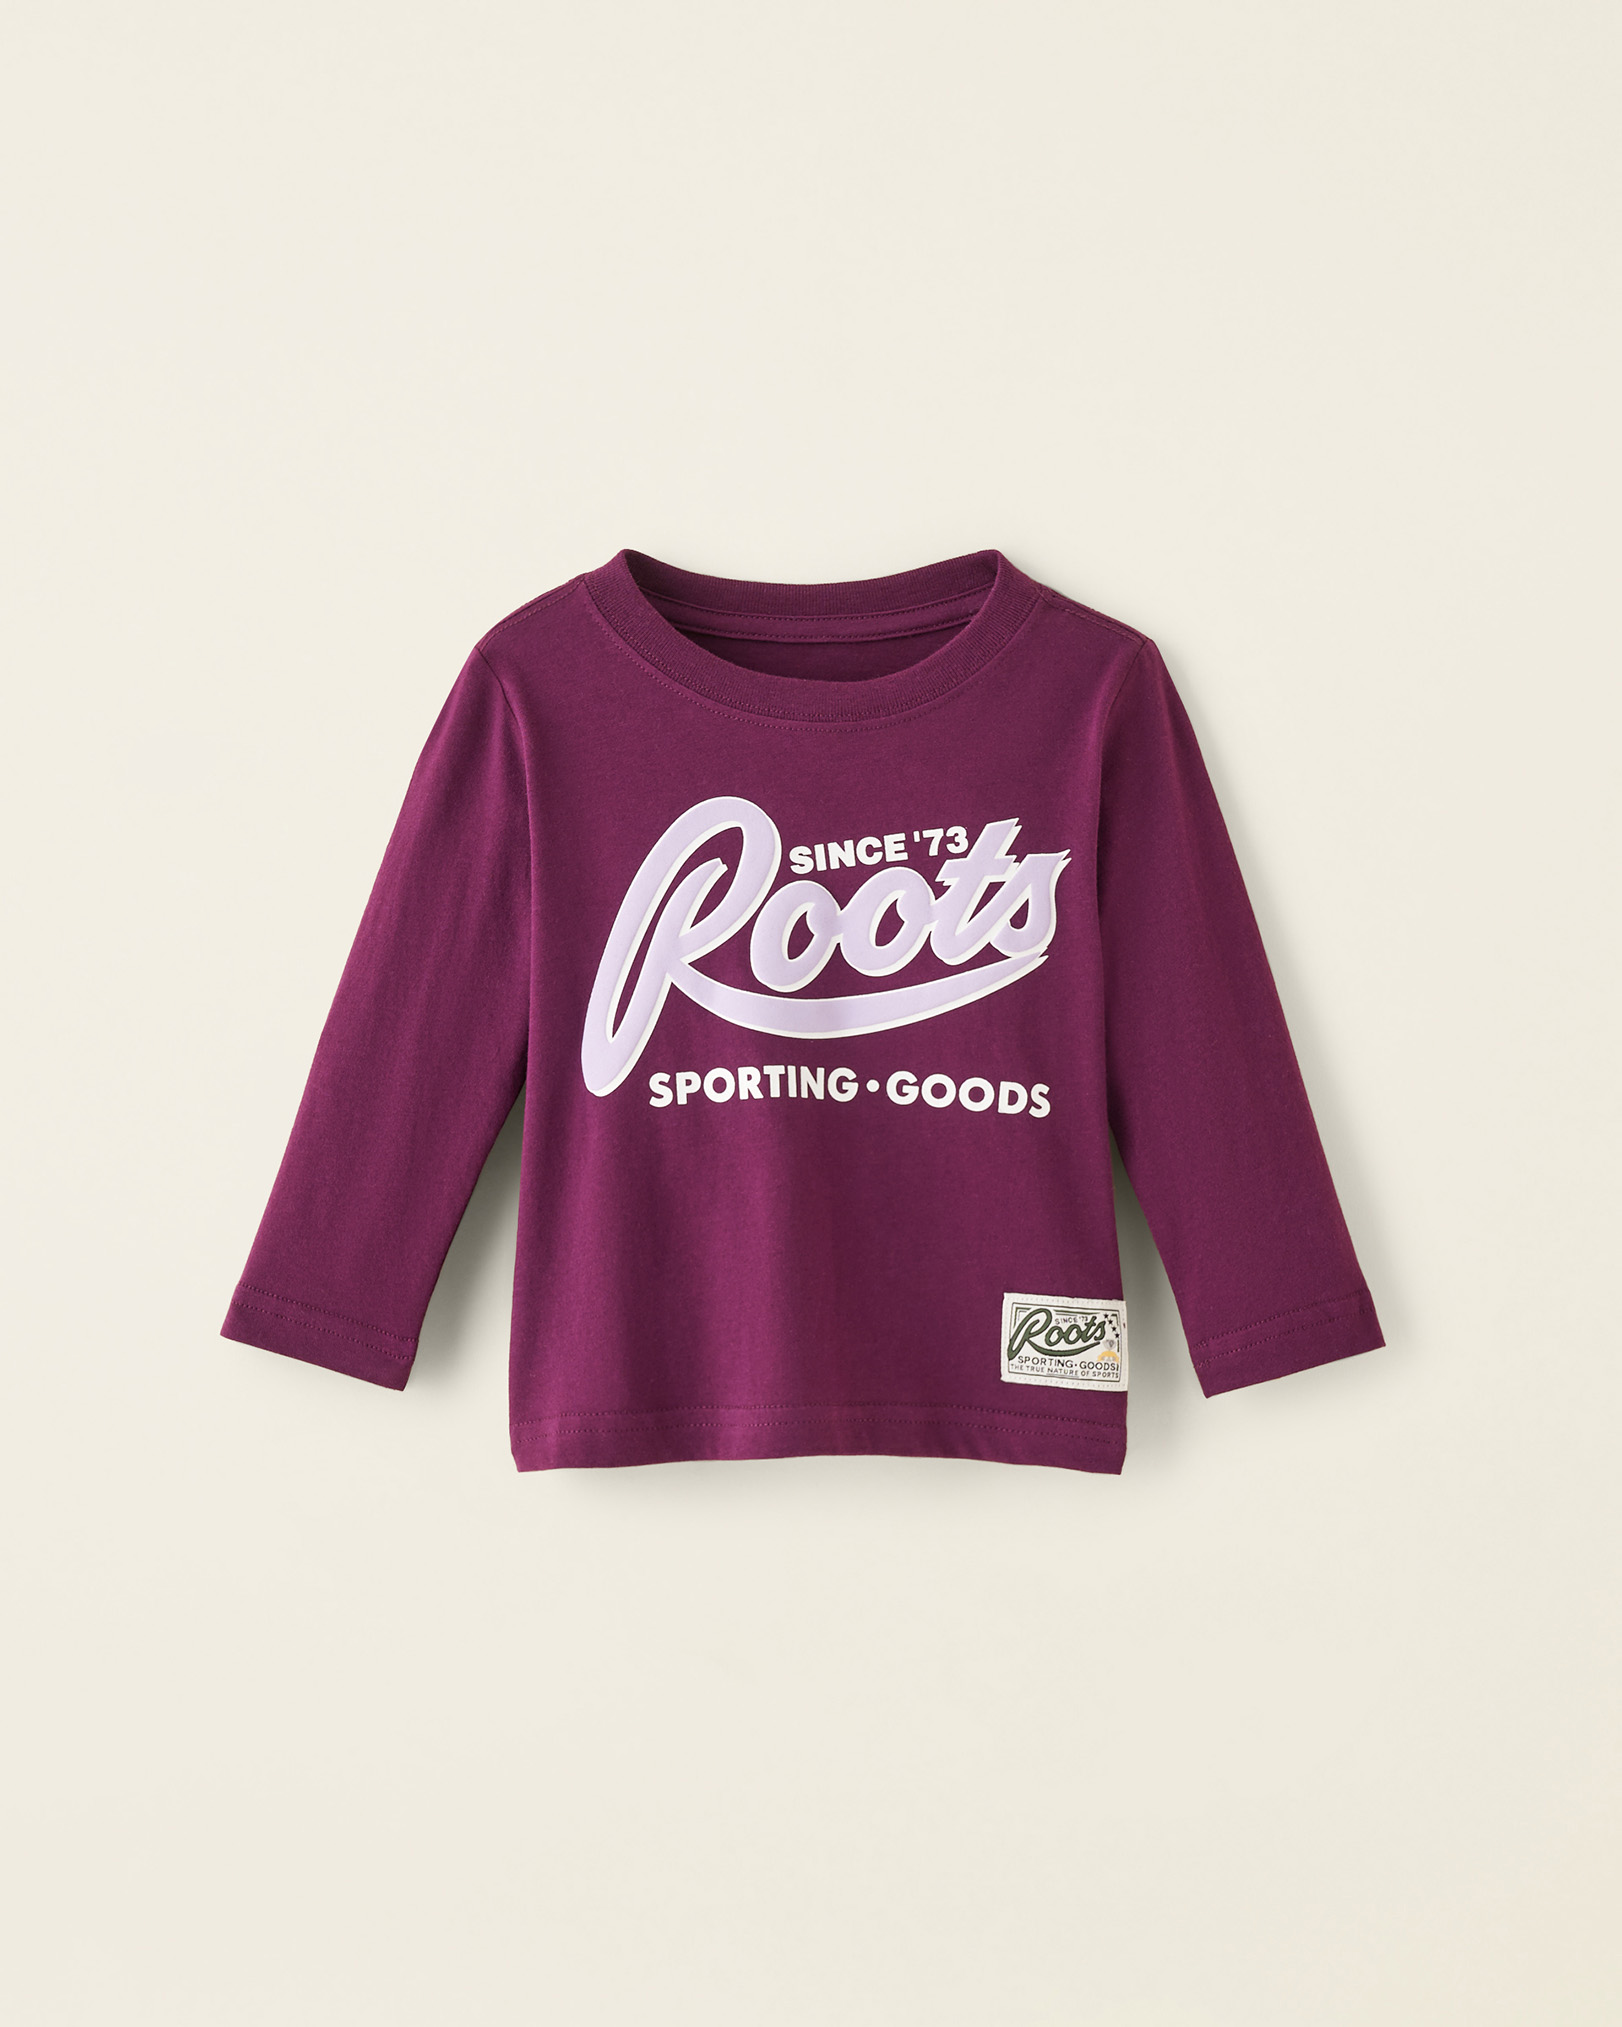 Roots Baby Sporting Goods T-Shirt in Astral Purple